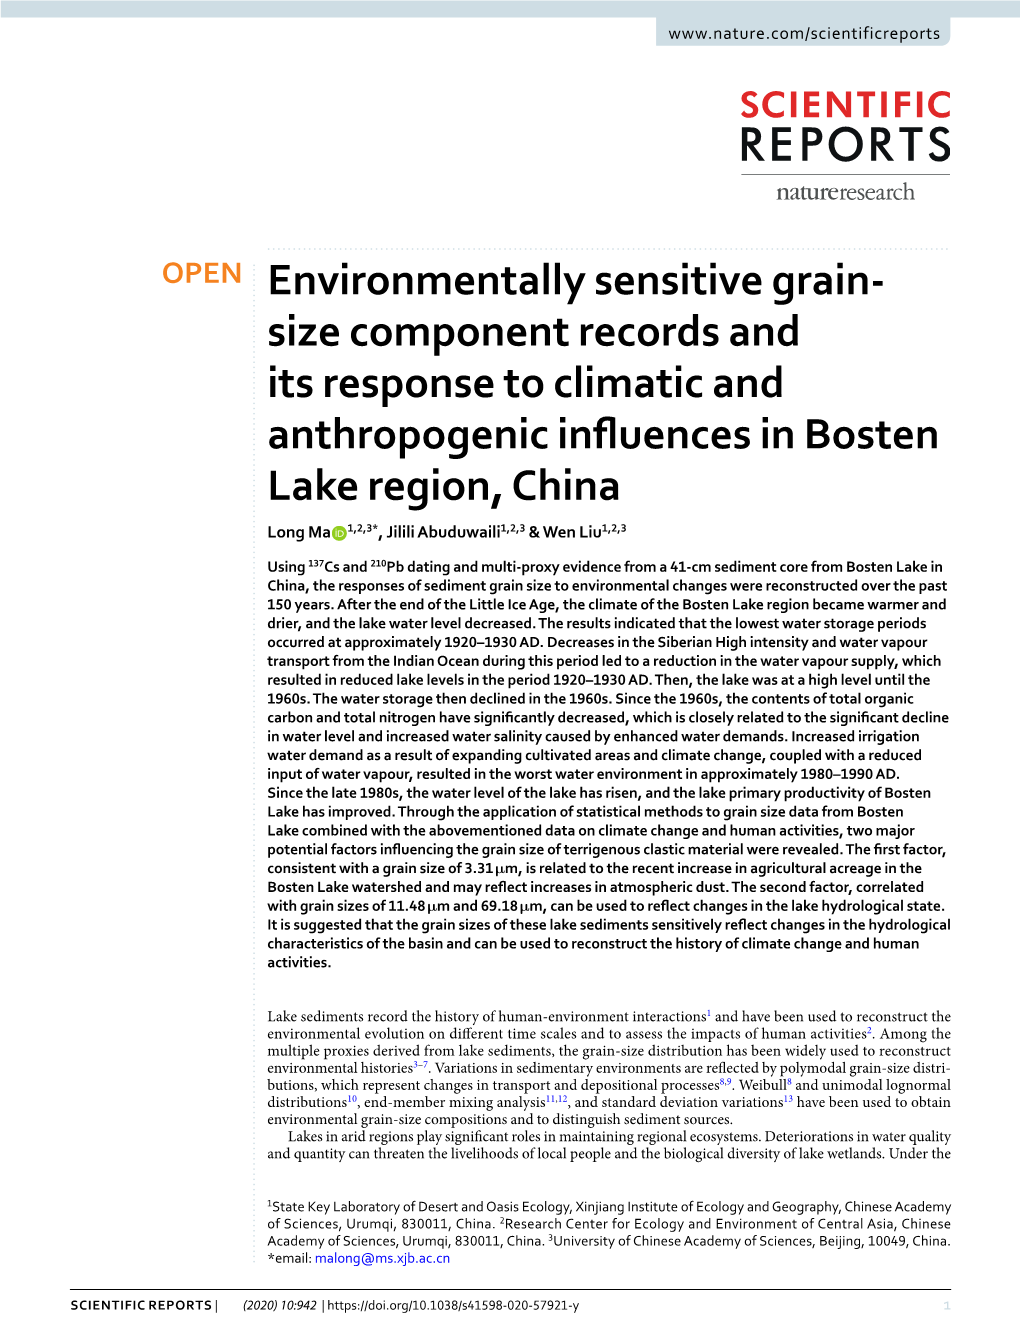 Environmentally Sensitive Grain-Size Component Records and Its